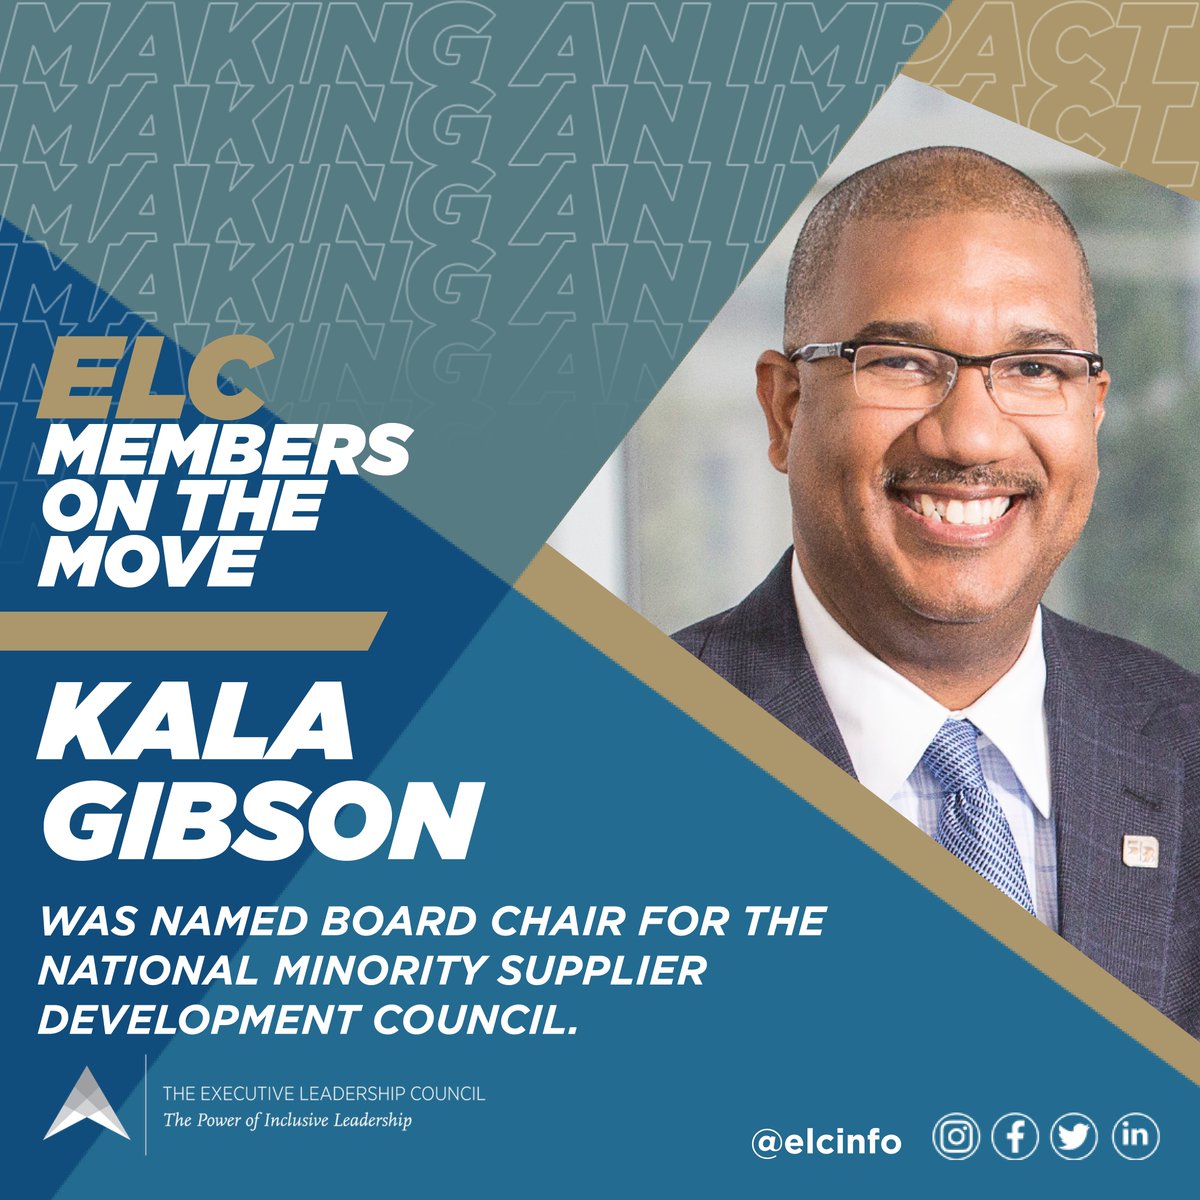 Congratulations to #ELCMember Kala Gibson, who was named Board Chair for the National Minority Supplier Development Council (@NMSDCHQ).

#ELCMembersOnTheMove #BlackMenLead #BlackExecutives #BlackLeadership